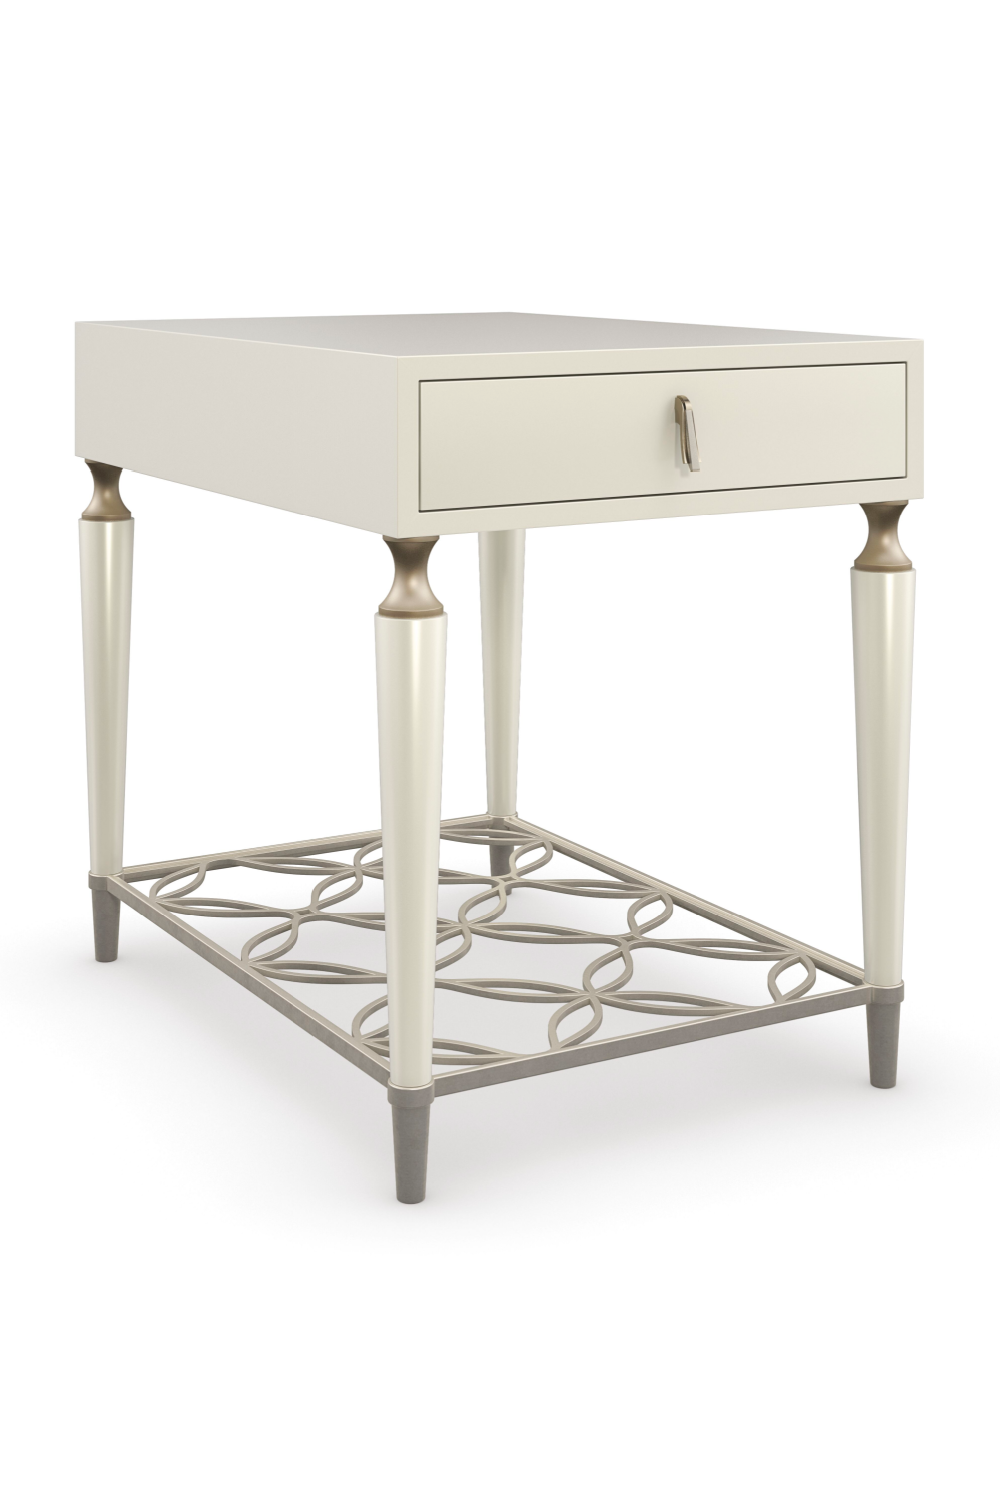 Latticed Wooden End Table | Caracole Charming To The End | Oroa.com